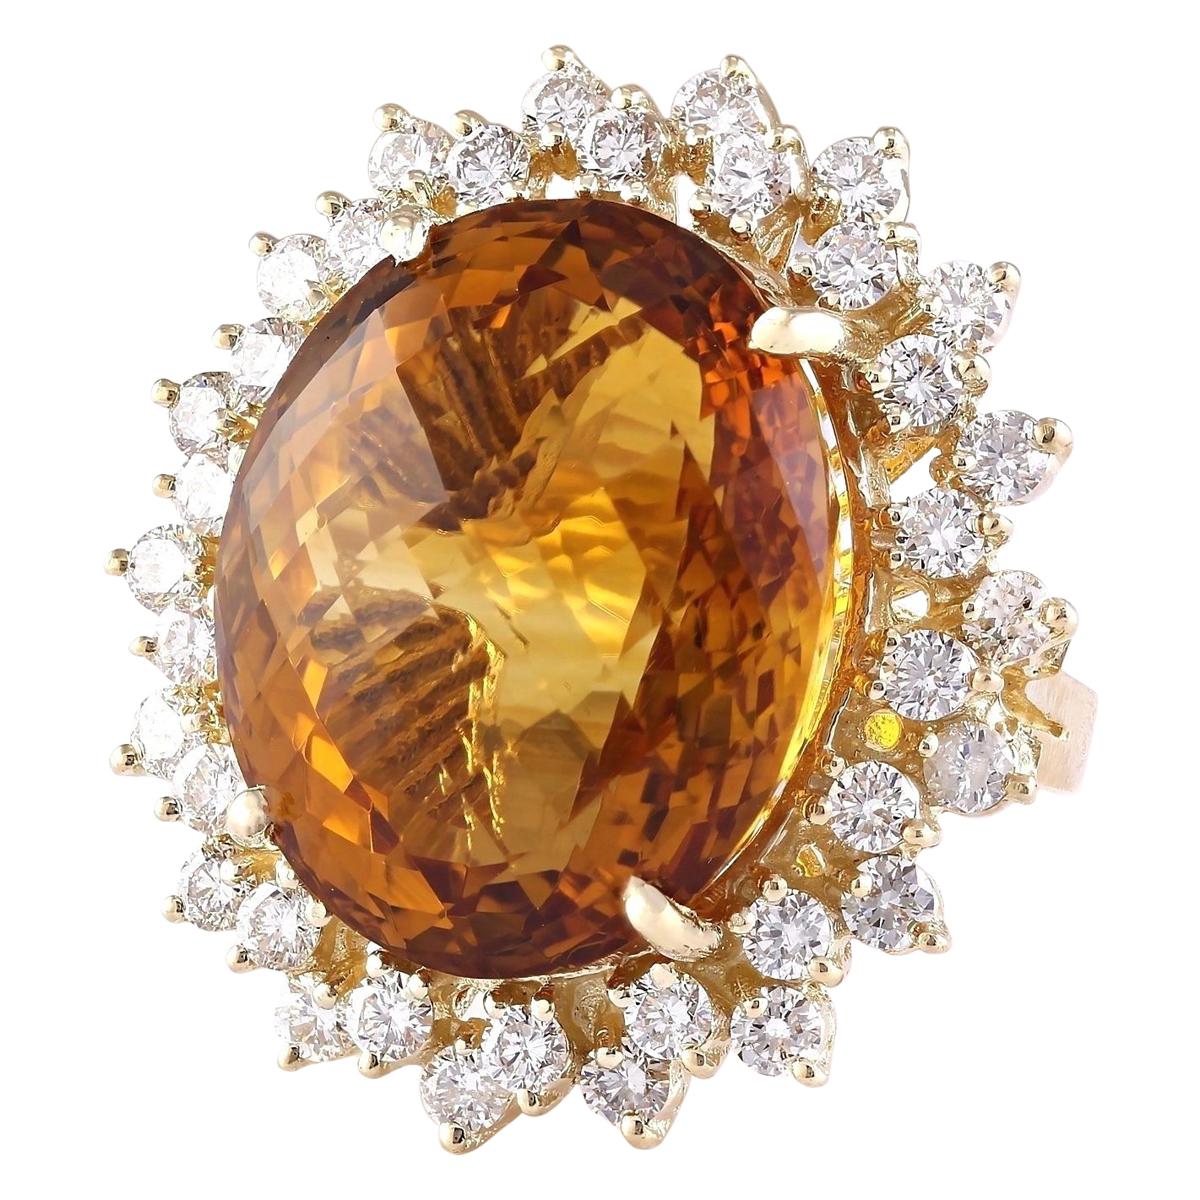 Stamped: 14K Yellow Gold
Total Ring Weight: 15.6 Grams
Citrine Weight is 26.47 Carat (Measures: 20.00x15.00 mm)
Diamond Weight is 2.00 Carat
Color: F-G, Clarity: VS2-SI1
Face Measures: 29.50x26.35 mm
Sku: [703702W]